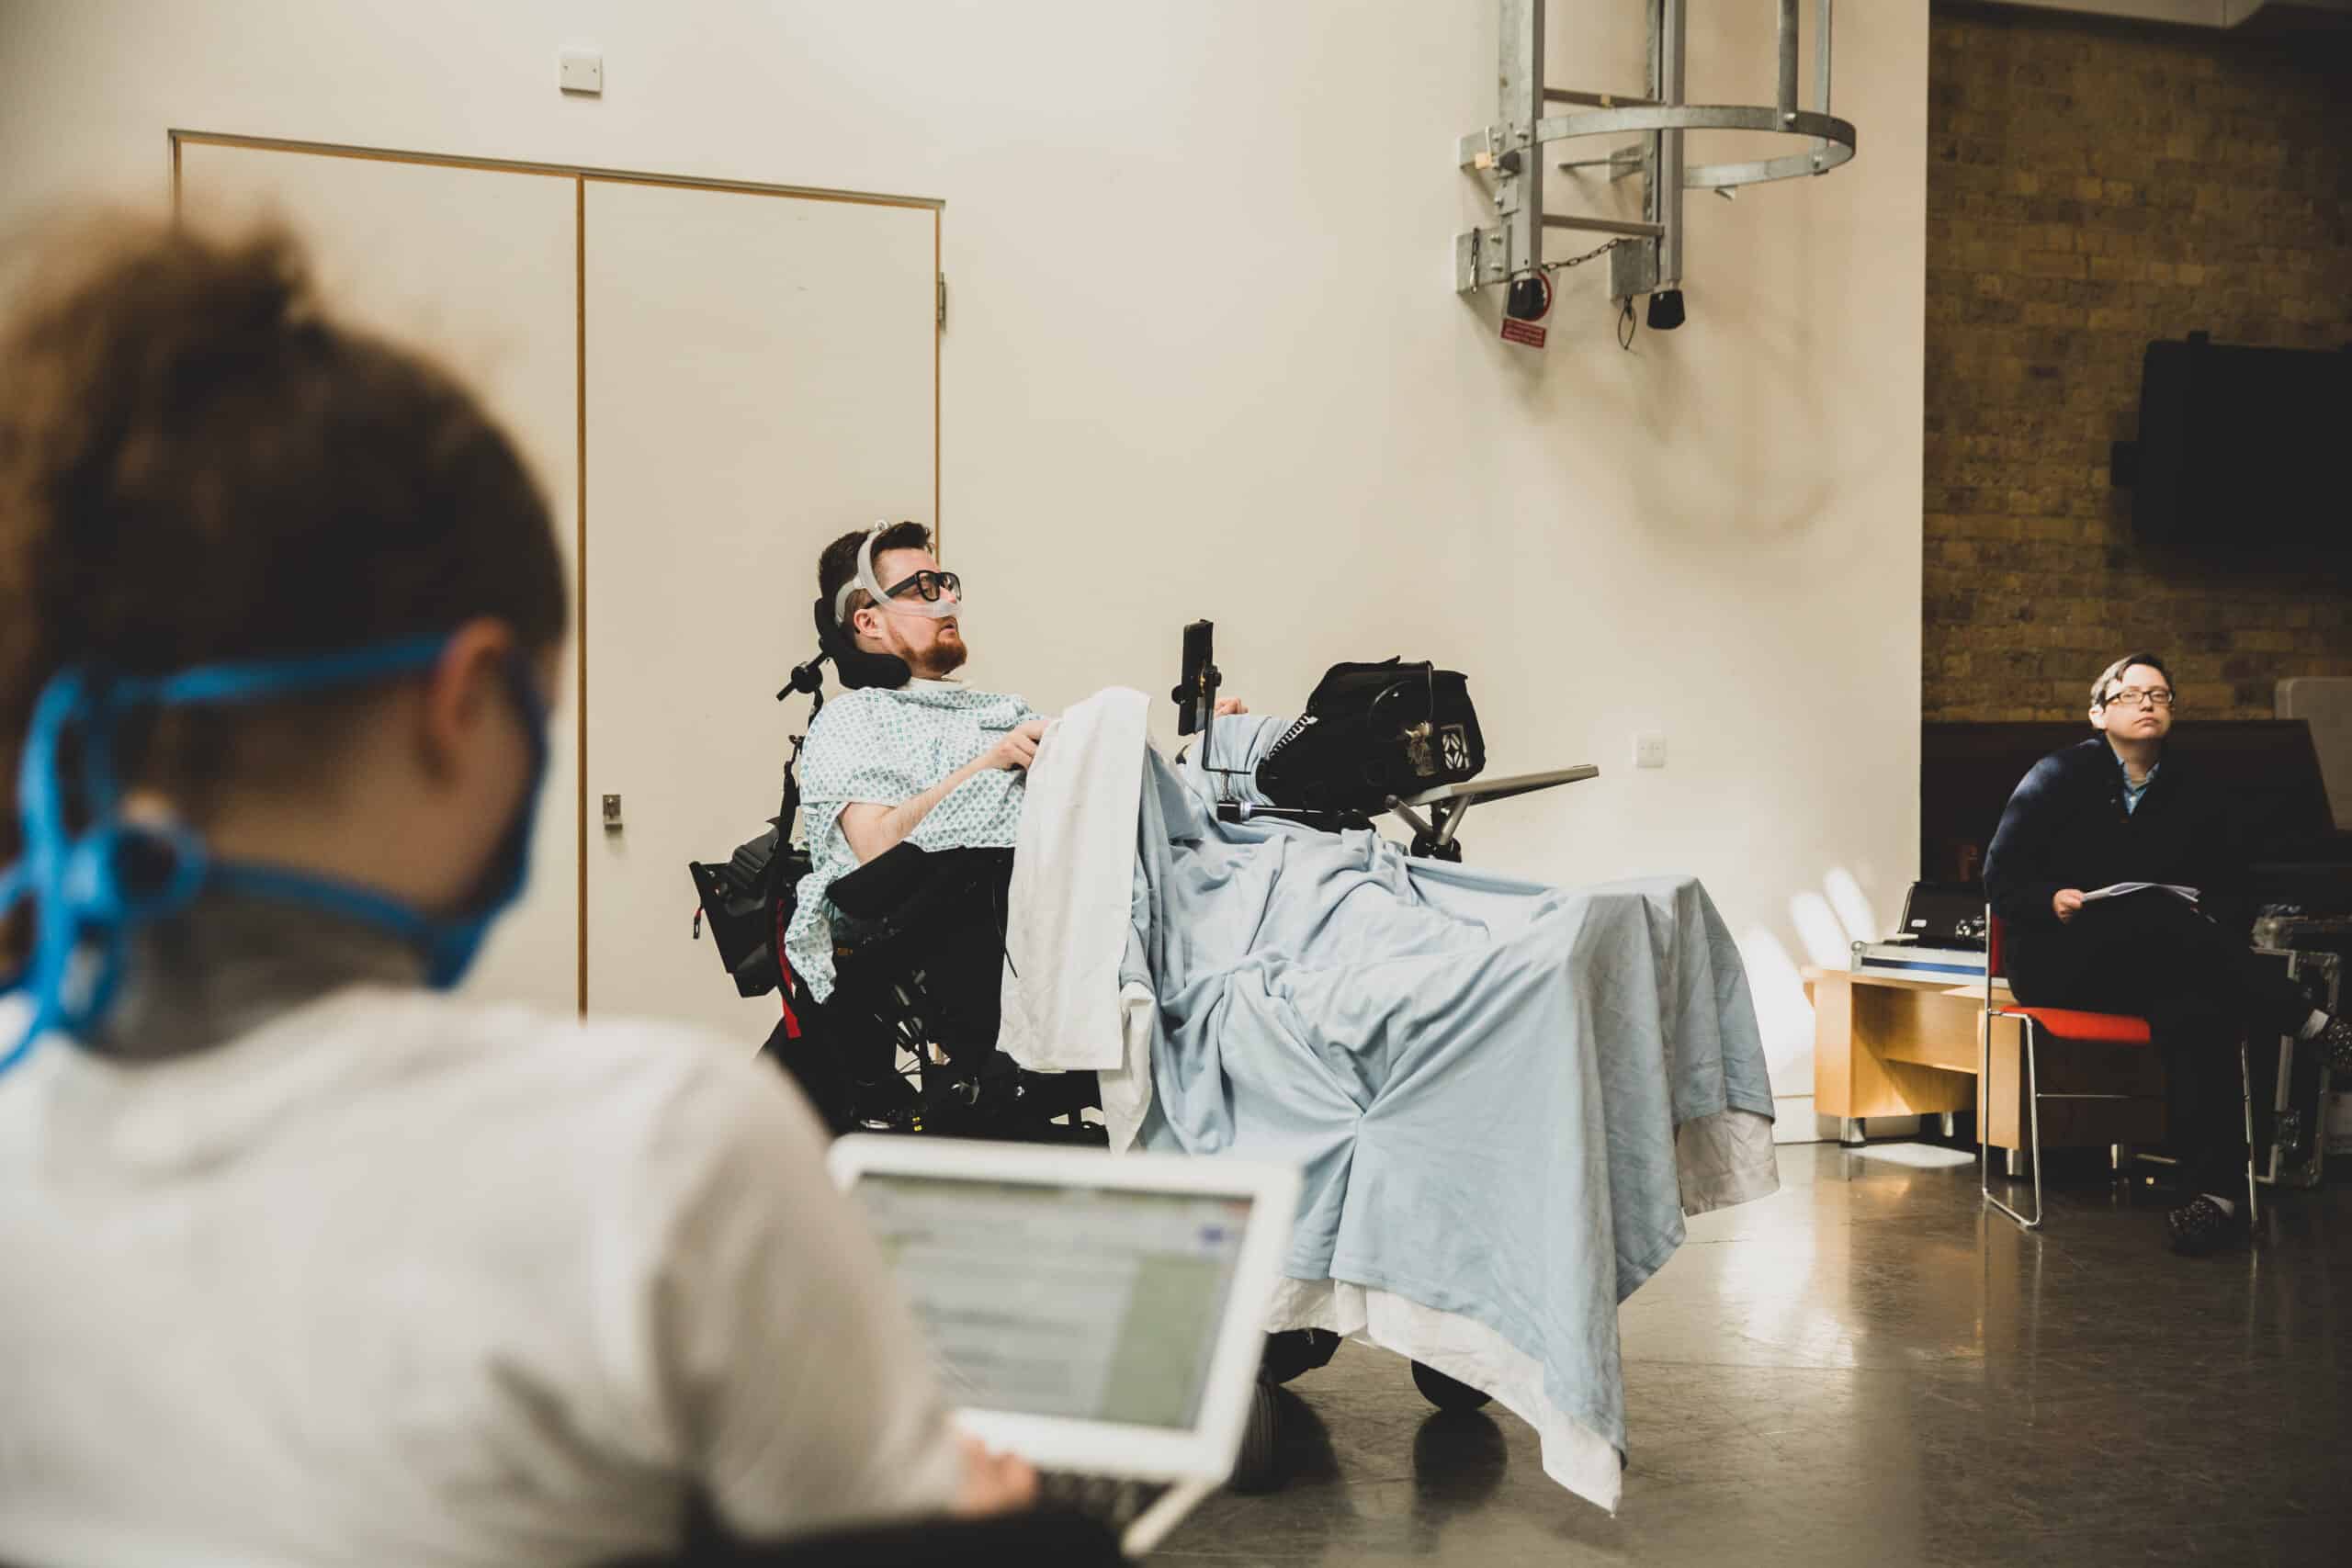 Jamie, a white person with dark red hair and beard, sits in an electric wheelchair, made to look like a hospital bed with blankets and sheets. They are wearing a ventilator mask. To the left, a person sits using a laptop, they have long brown hair, and are out of focus.